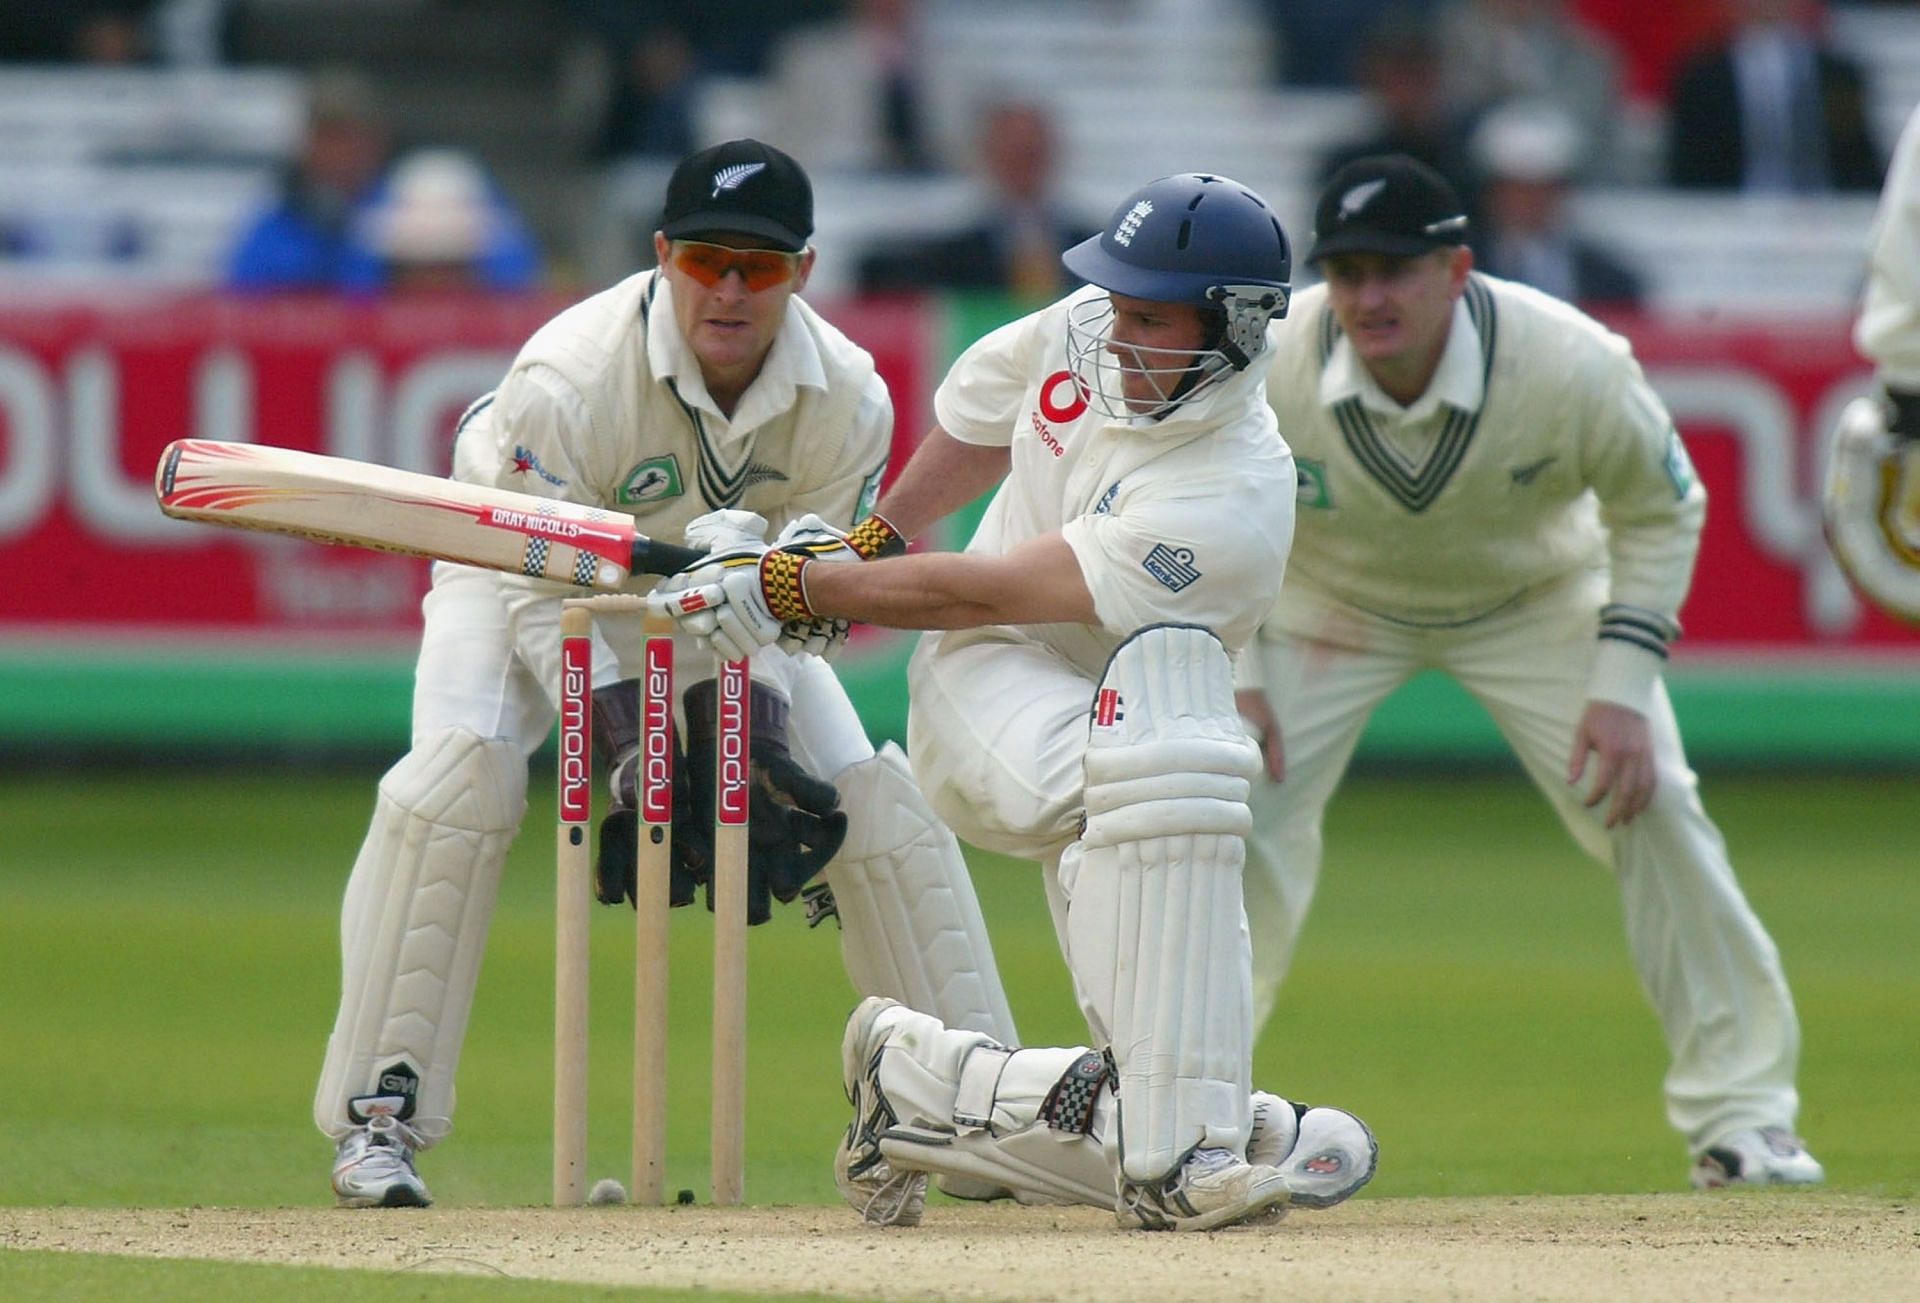 Andrew Strauss batting during his debut Test. Pic: Getty Images